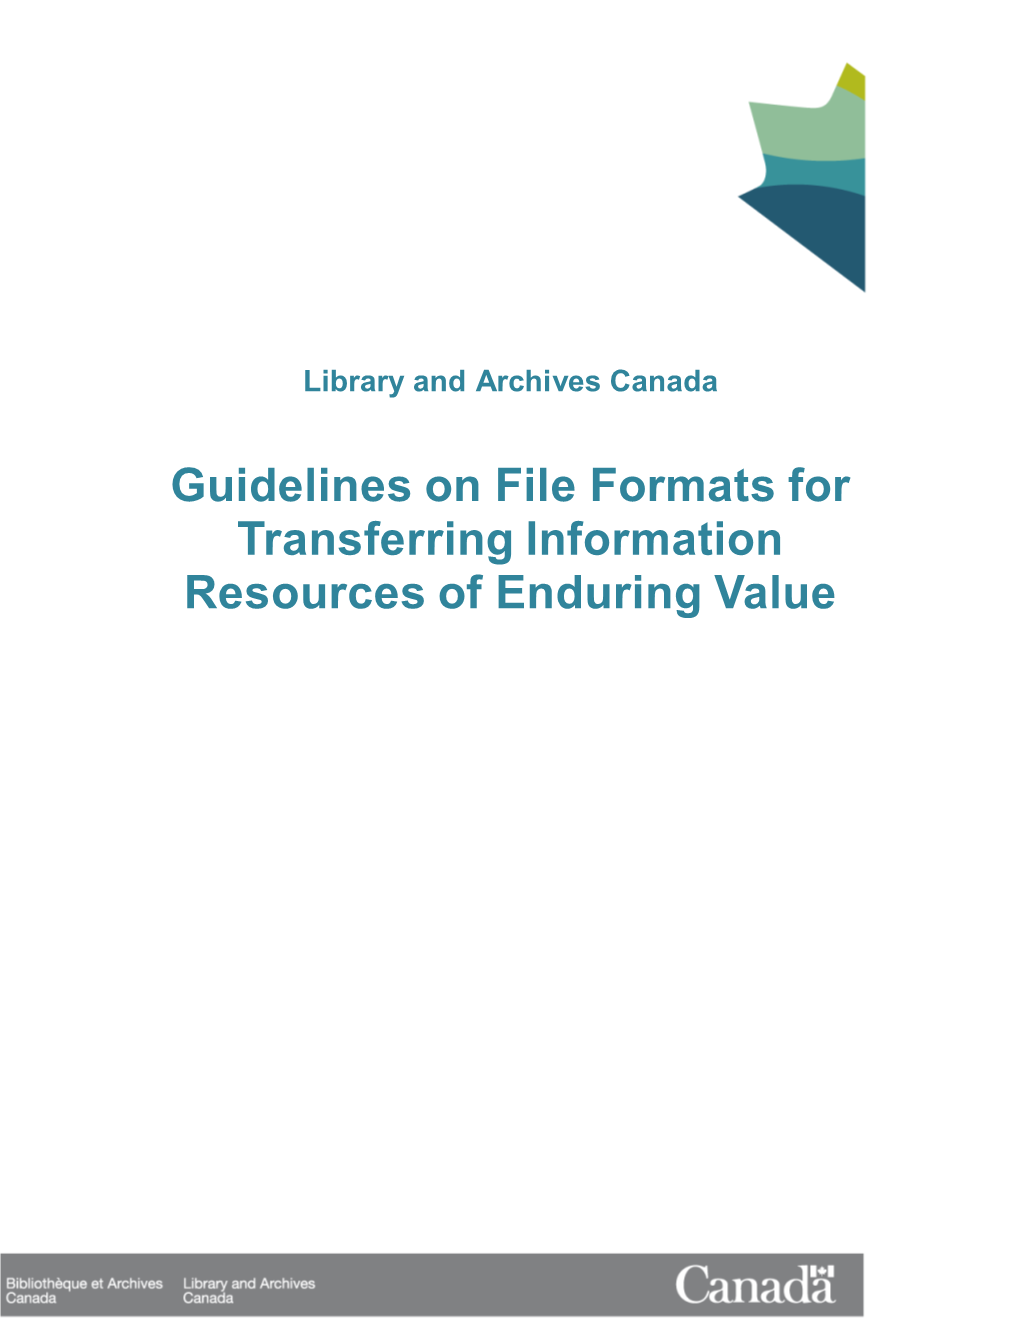 Guidelines on File Formats for Transferring Information Resources of Enduring Value